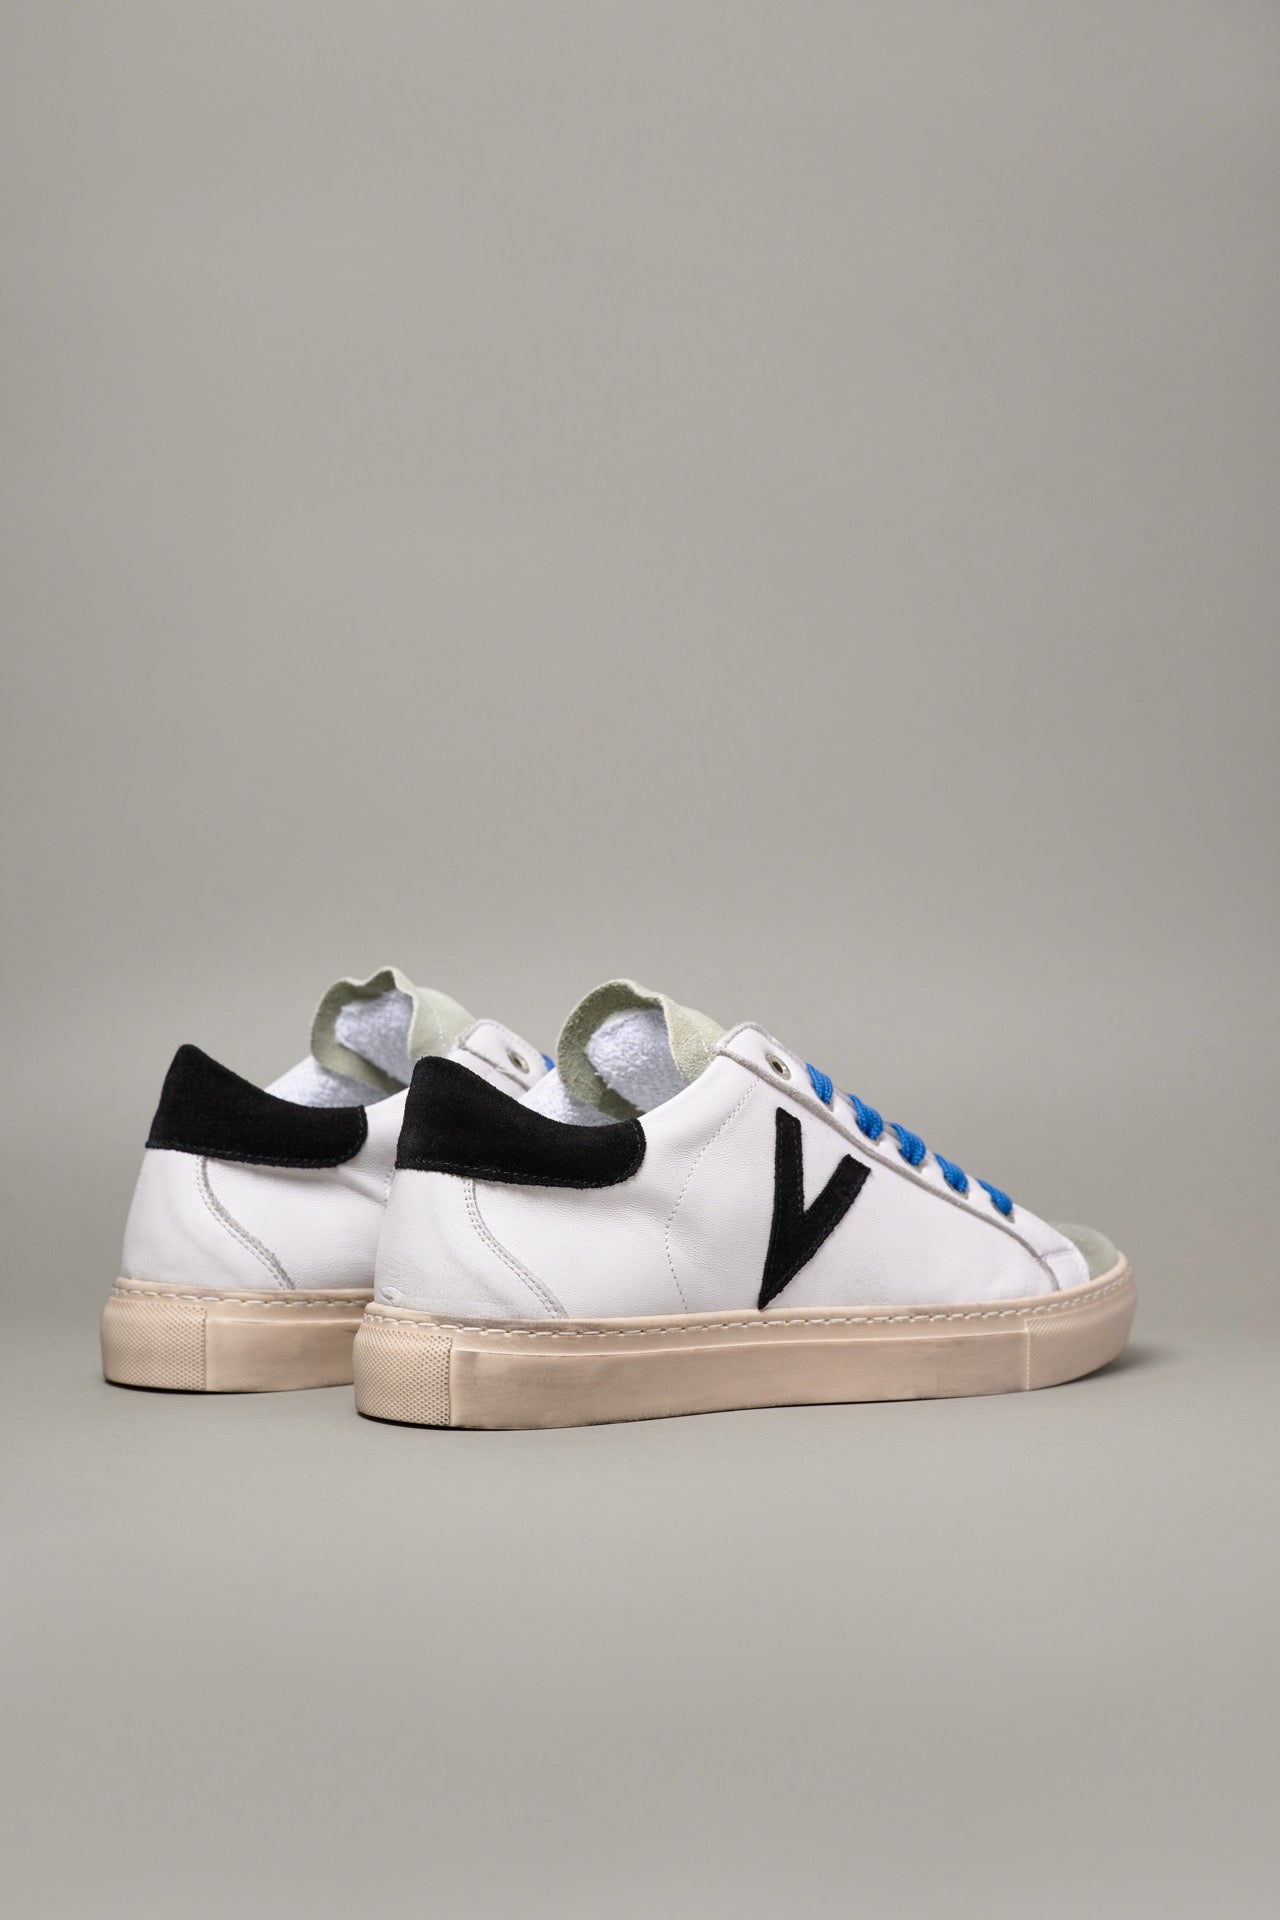 OLYMPIC - White low sole sneakers with Black suede back and insert and Blue laces